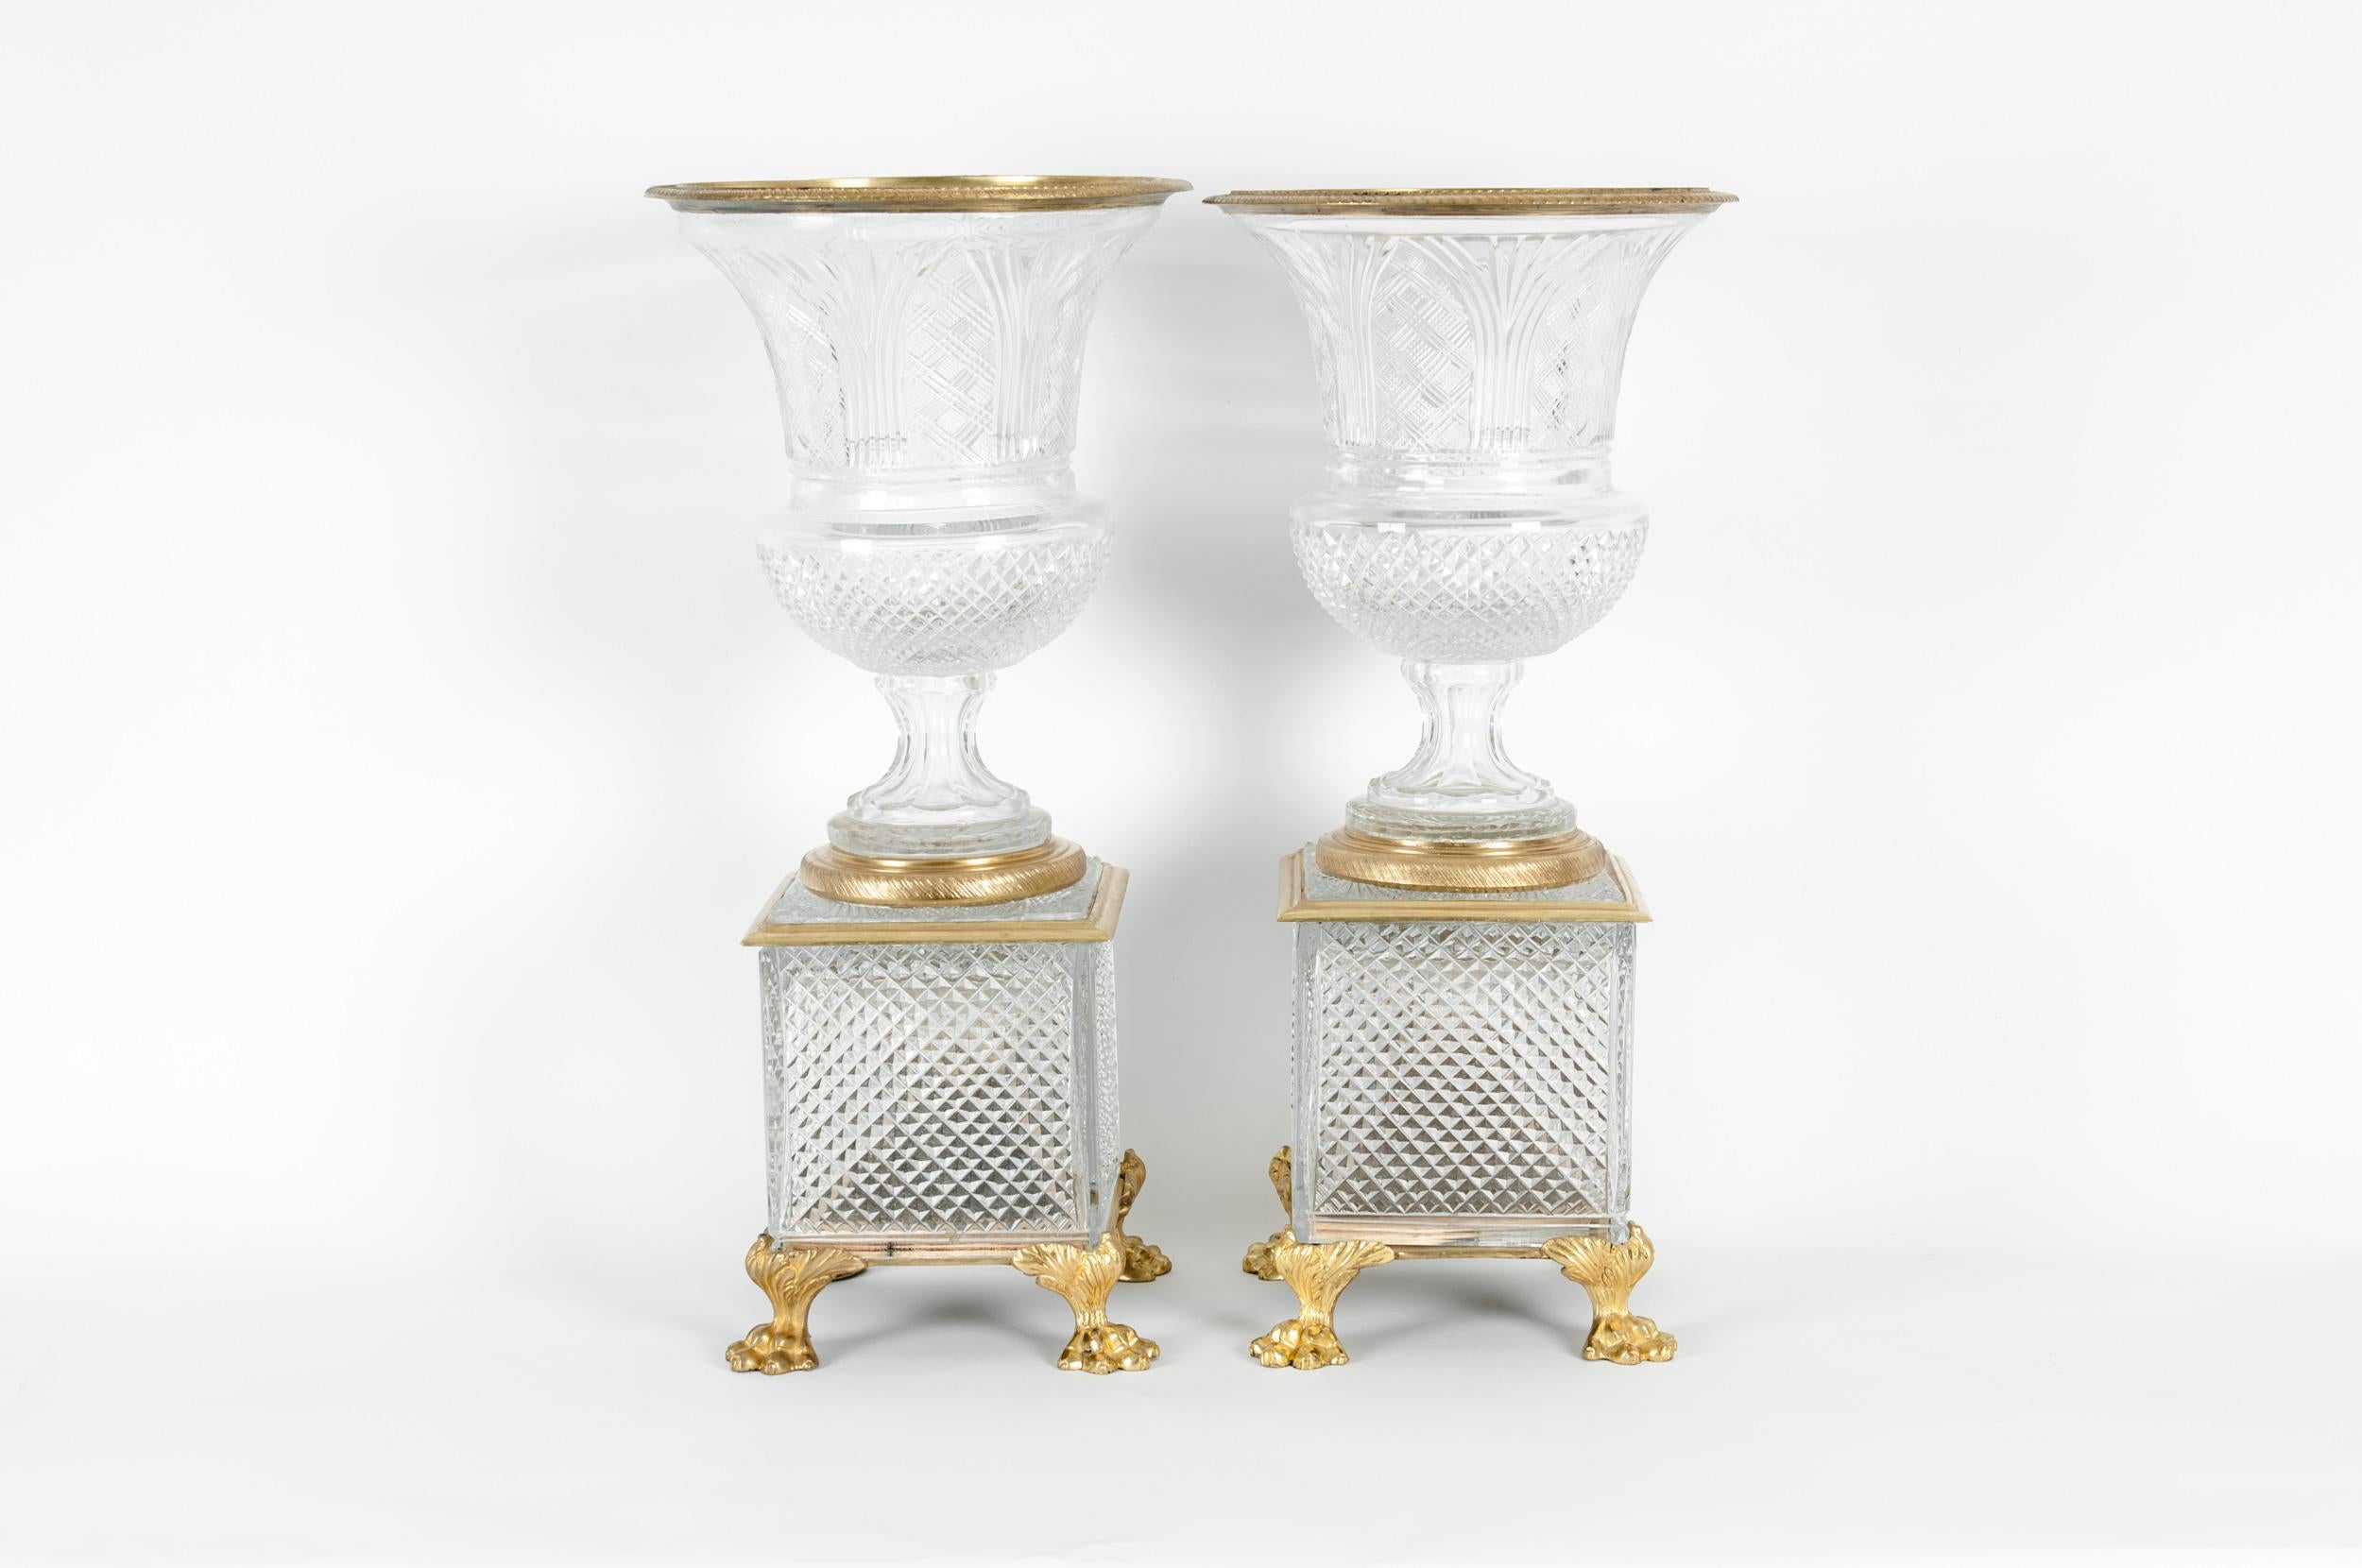 Late 19th century gilt bronze mounted / cut glass with square footed base pair decorative vase / centerpiece. Each urn / vase is in good antique condition with wear appropriate to age / use. One of the urn is glued to the base . Each one measure